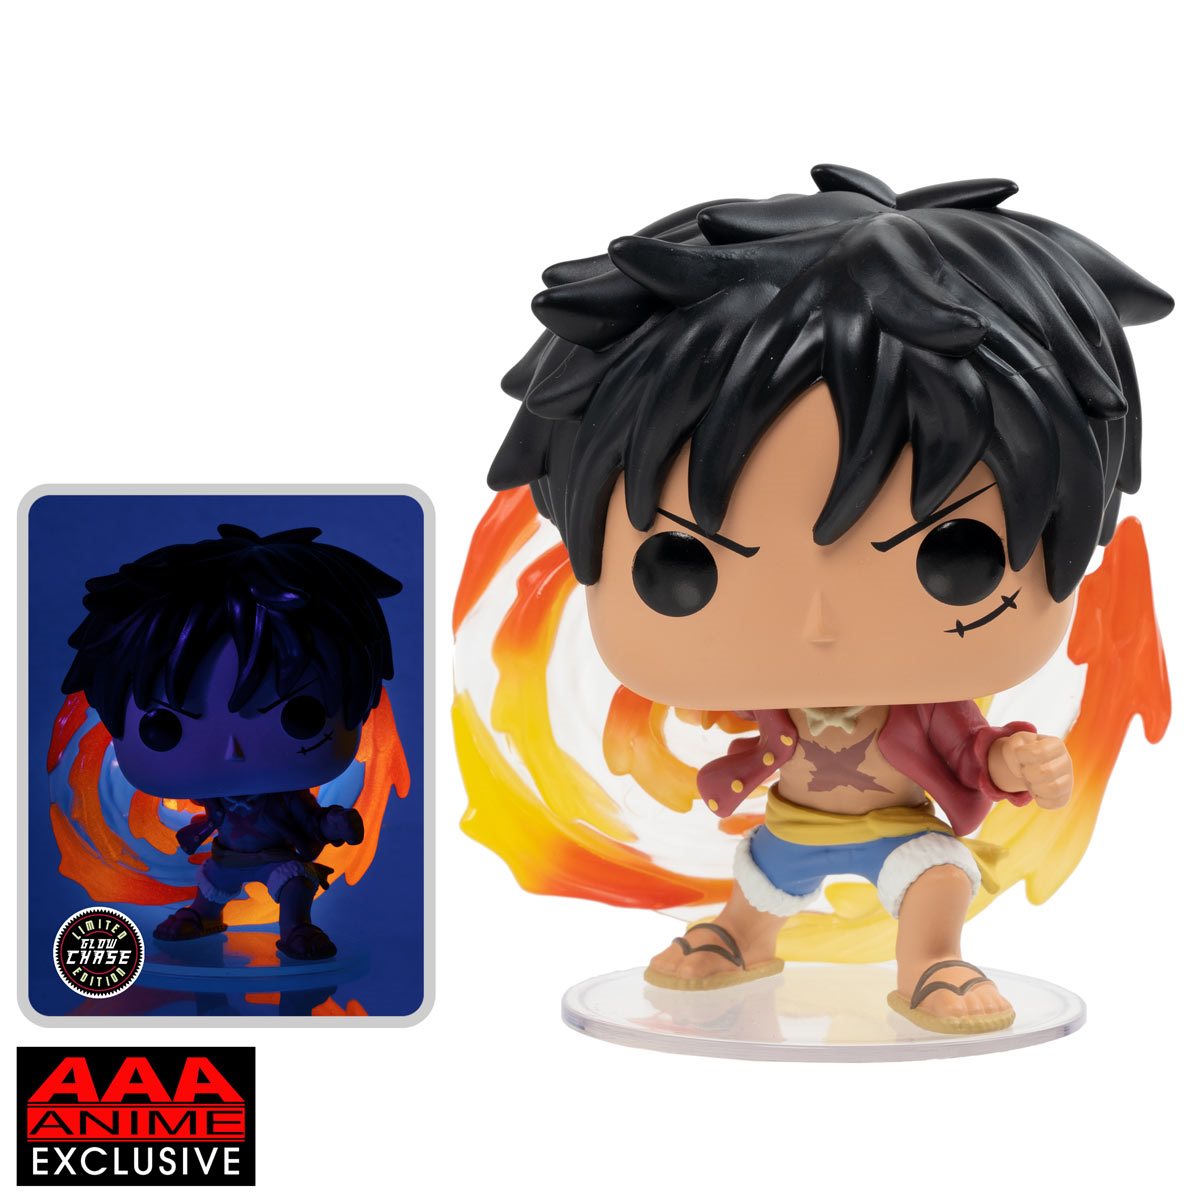 Funko POP! Animatiom: One Piece - Monkey D. Luffy Red Hawk  #1273 - AAA Anime Exclusive (Chase)